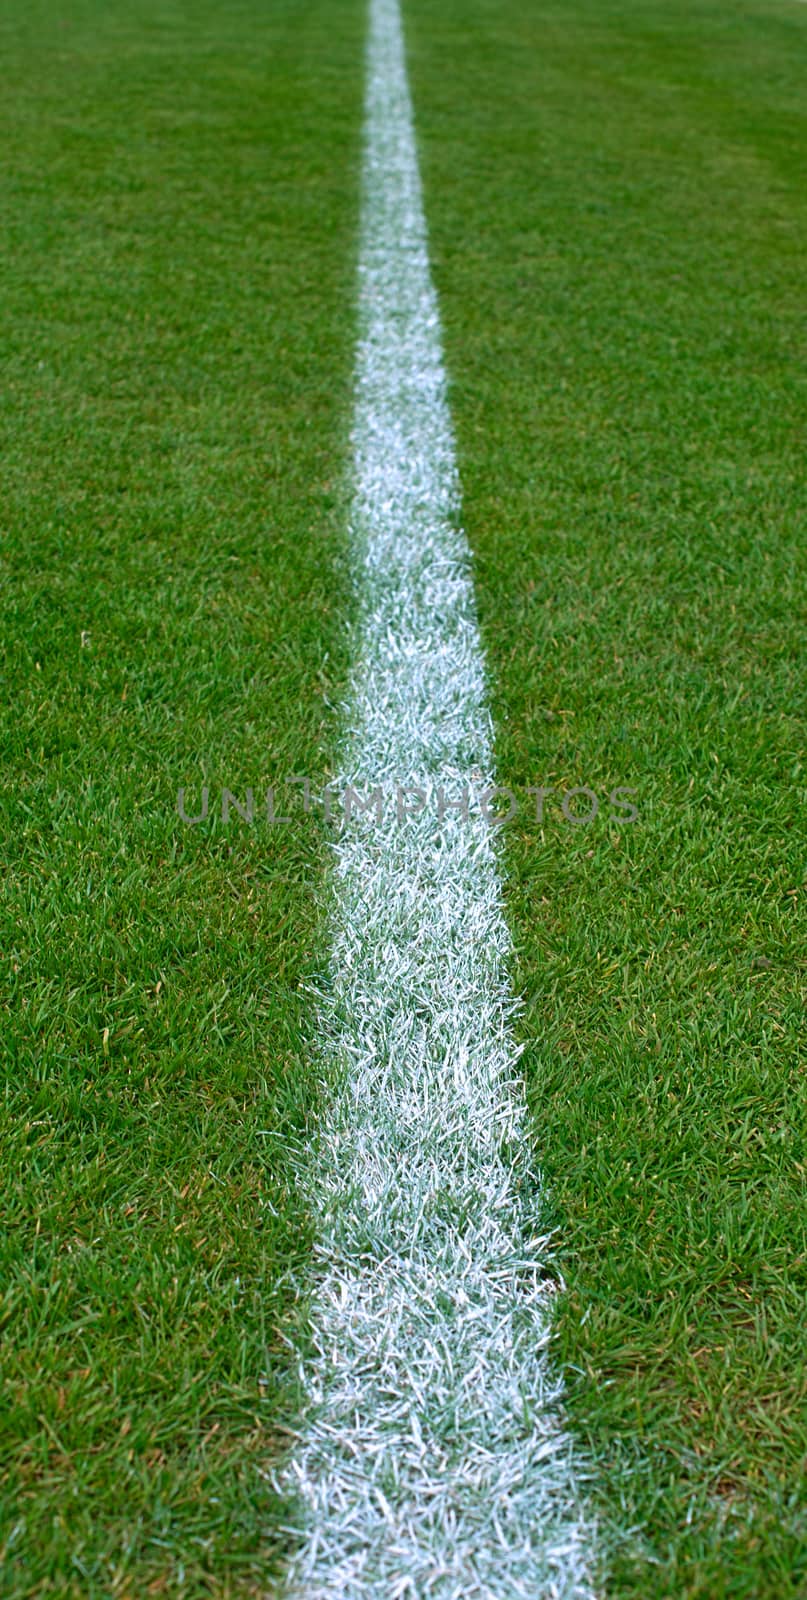 Painted white line on empty soccer grass field